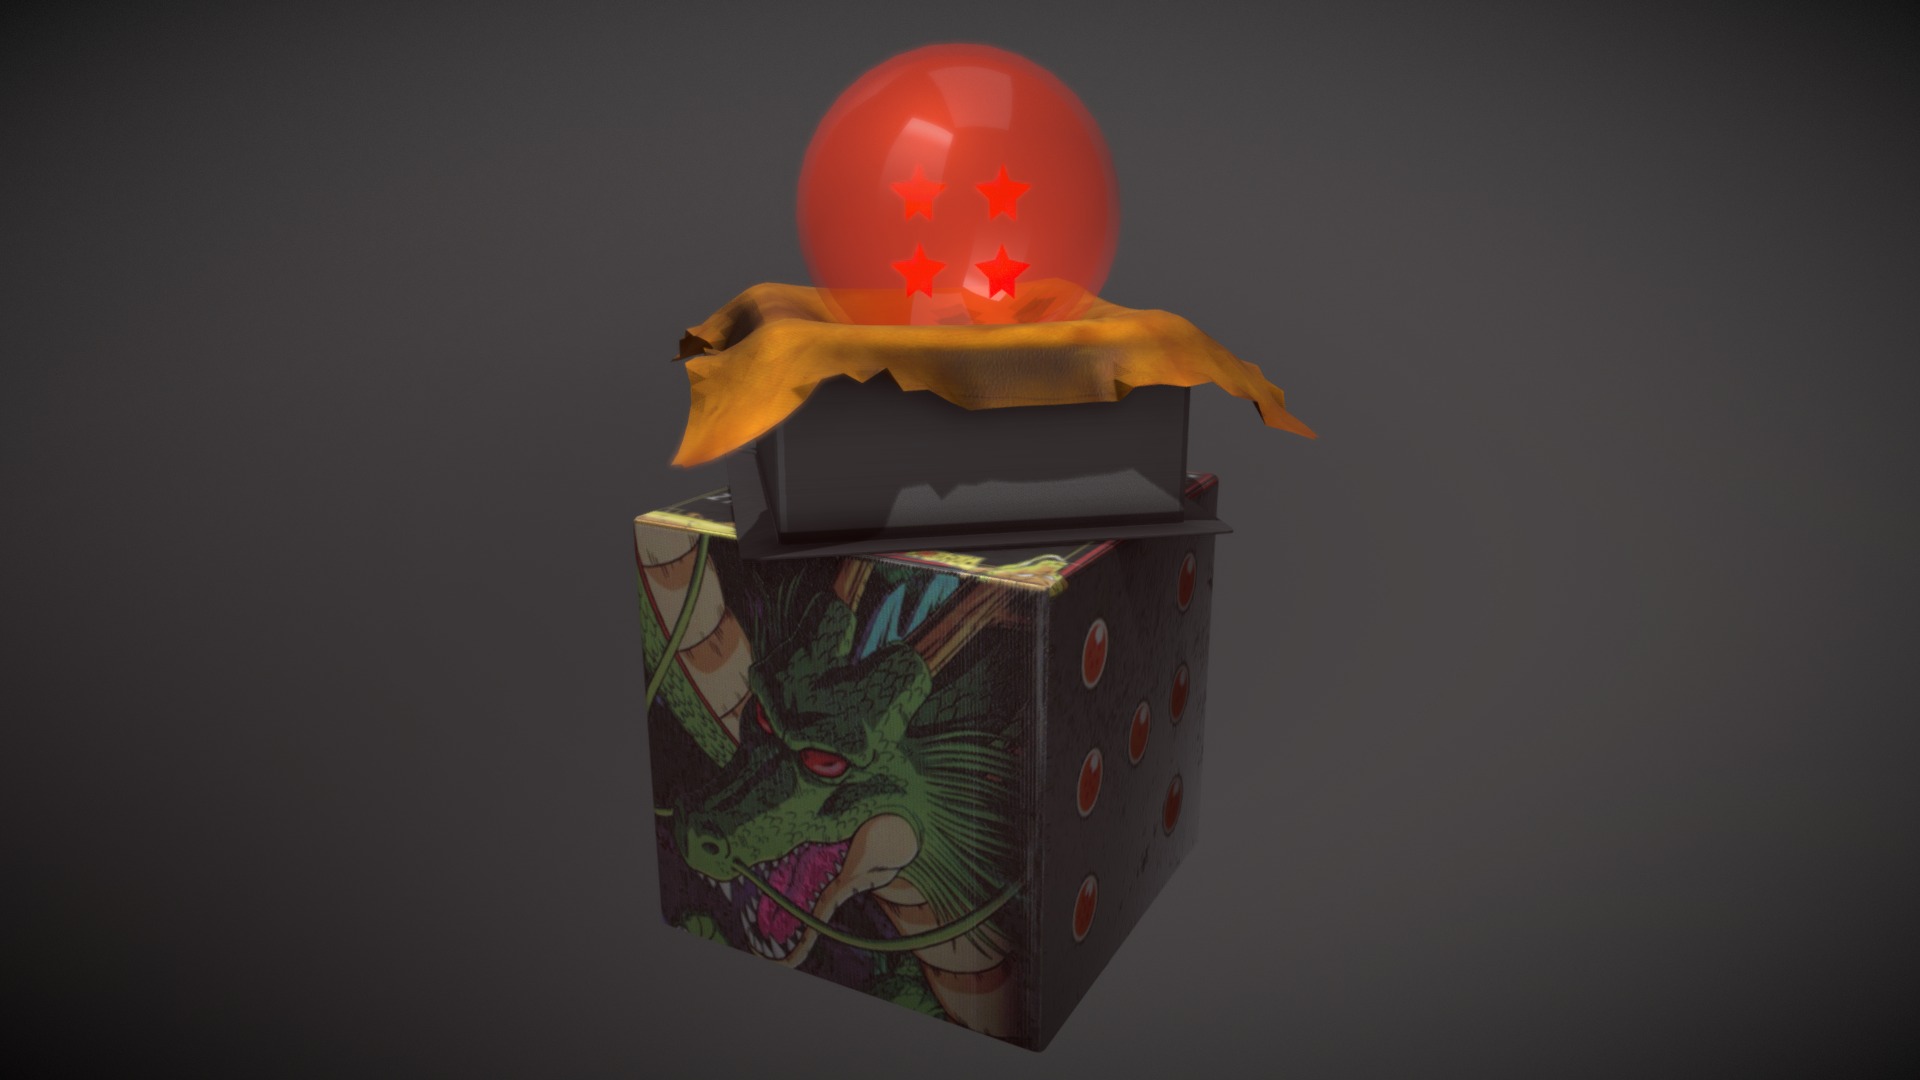 3D model 4 star Dragon ball - This is a 3D model of the 4 star Dragon ball. The 3D model is about a box with a cartoon character on it.